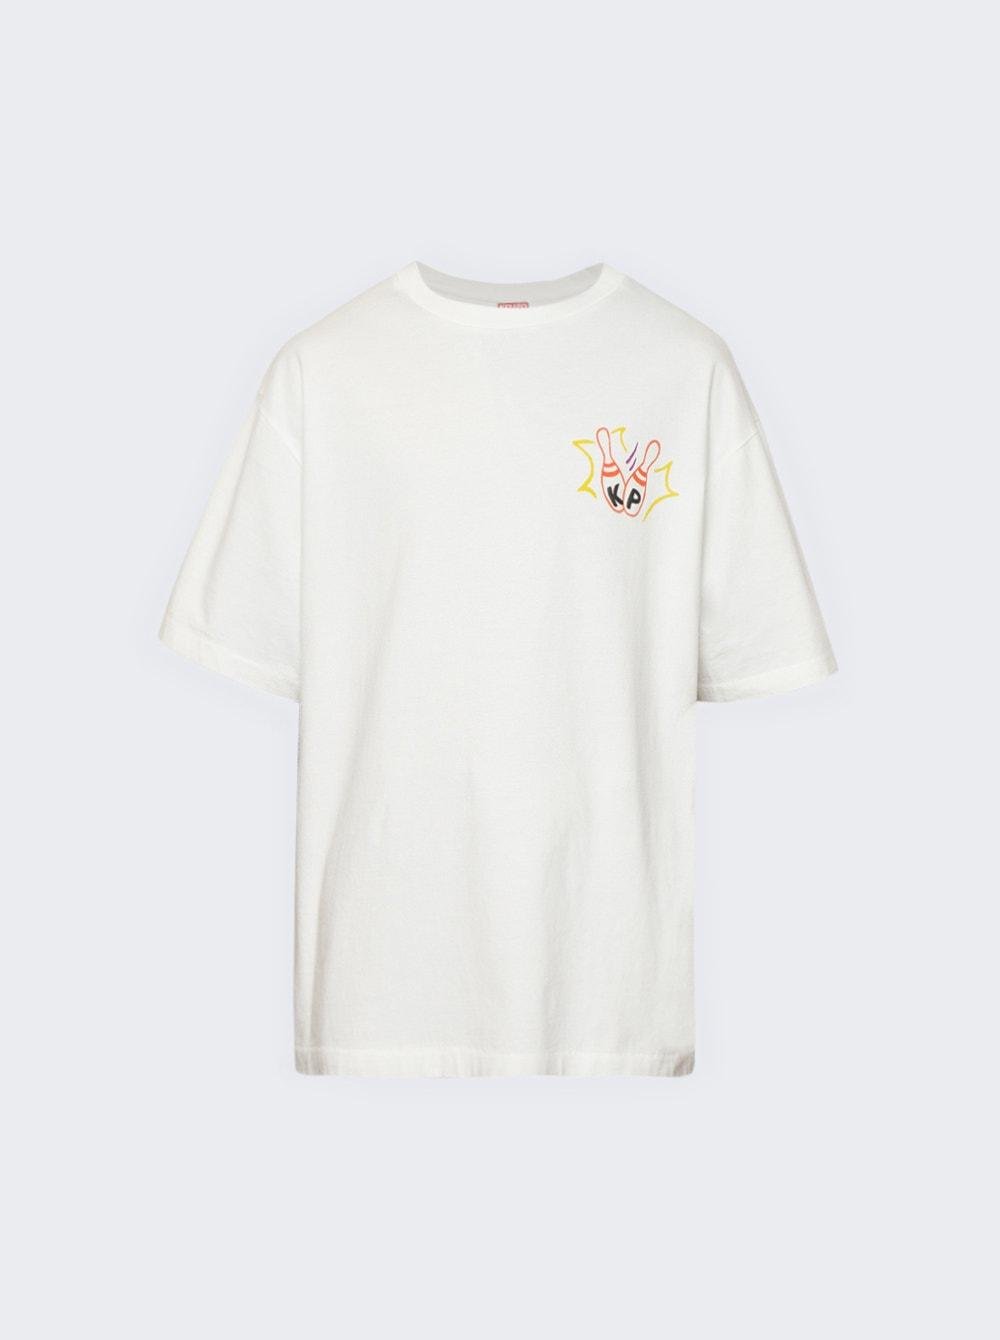 Oversized Bowling Team Tee Off White by KENZO